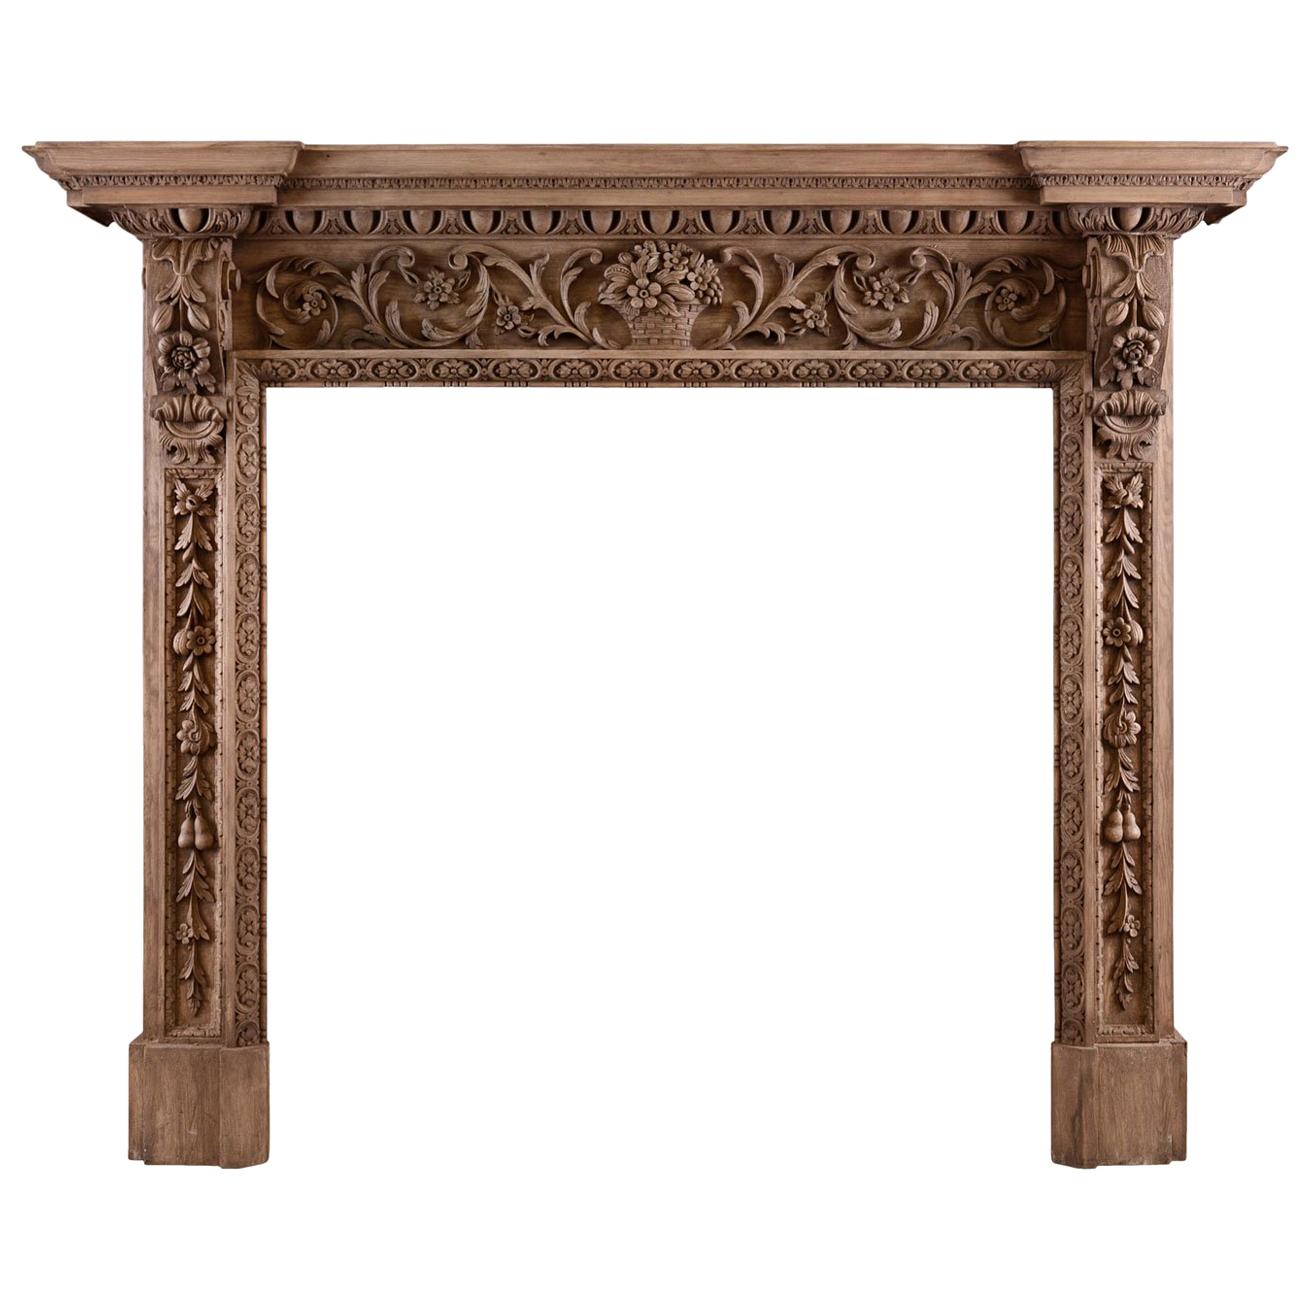 Ornate Pine Fireplace with Carving Throughout